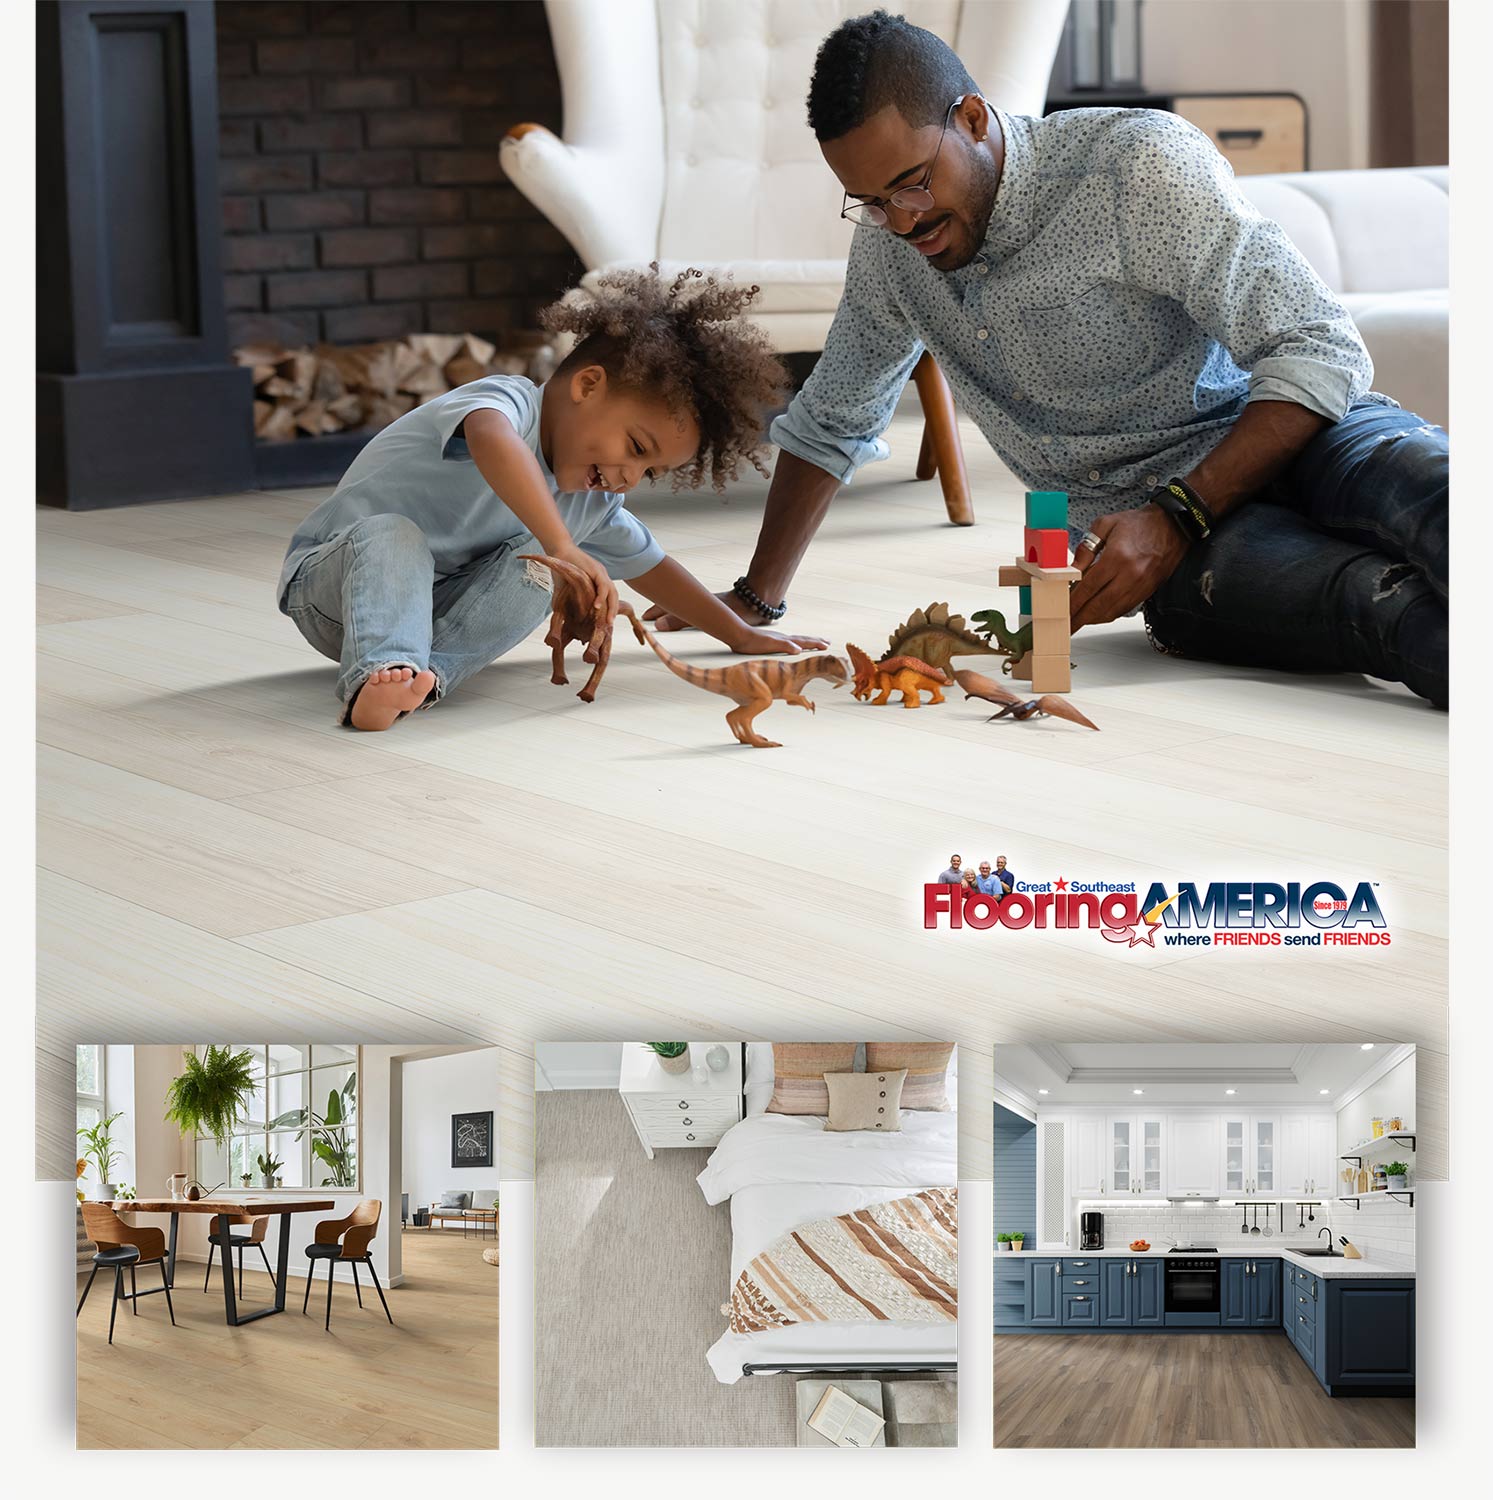 Great Southeast Flooring America Collage